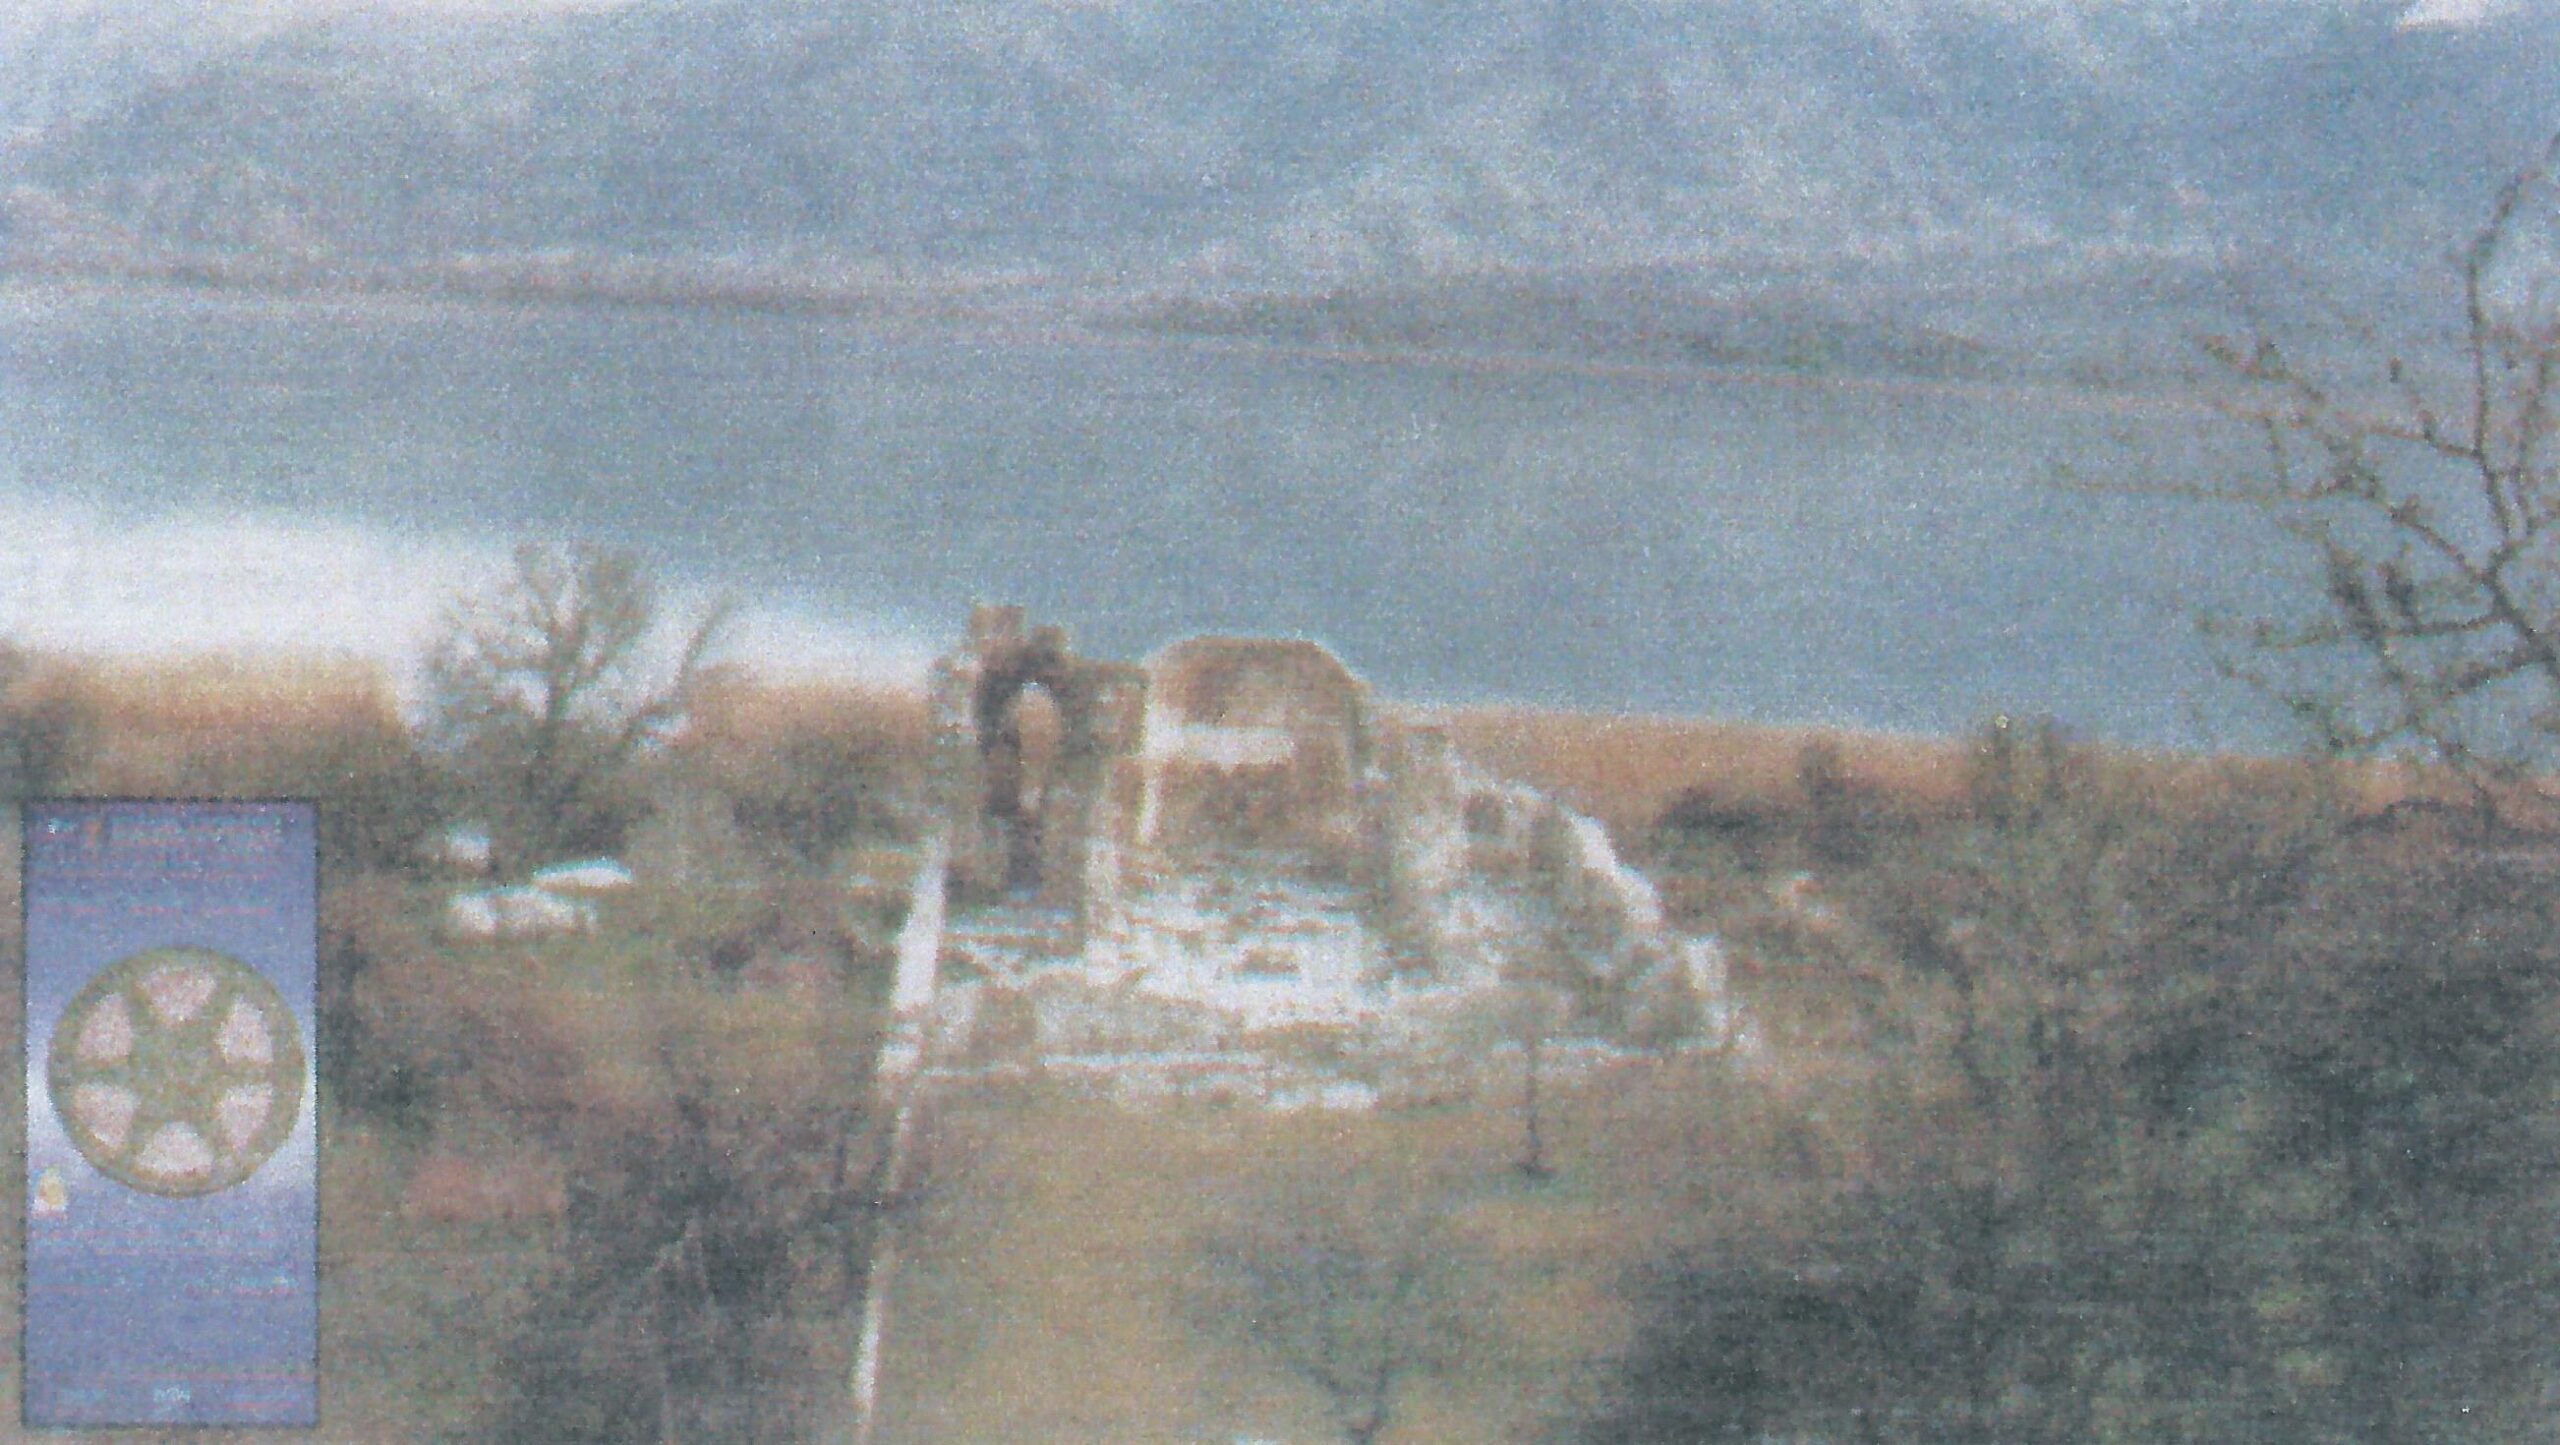 “Lord have mercy on the founders”. The Byzantine monuments of Prespa